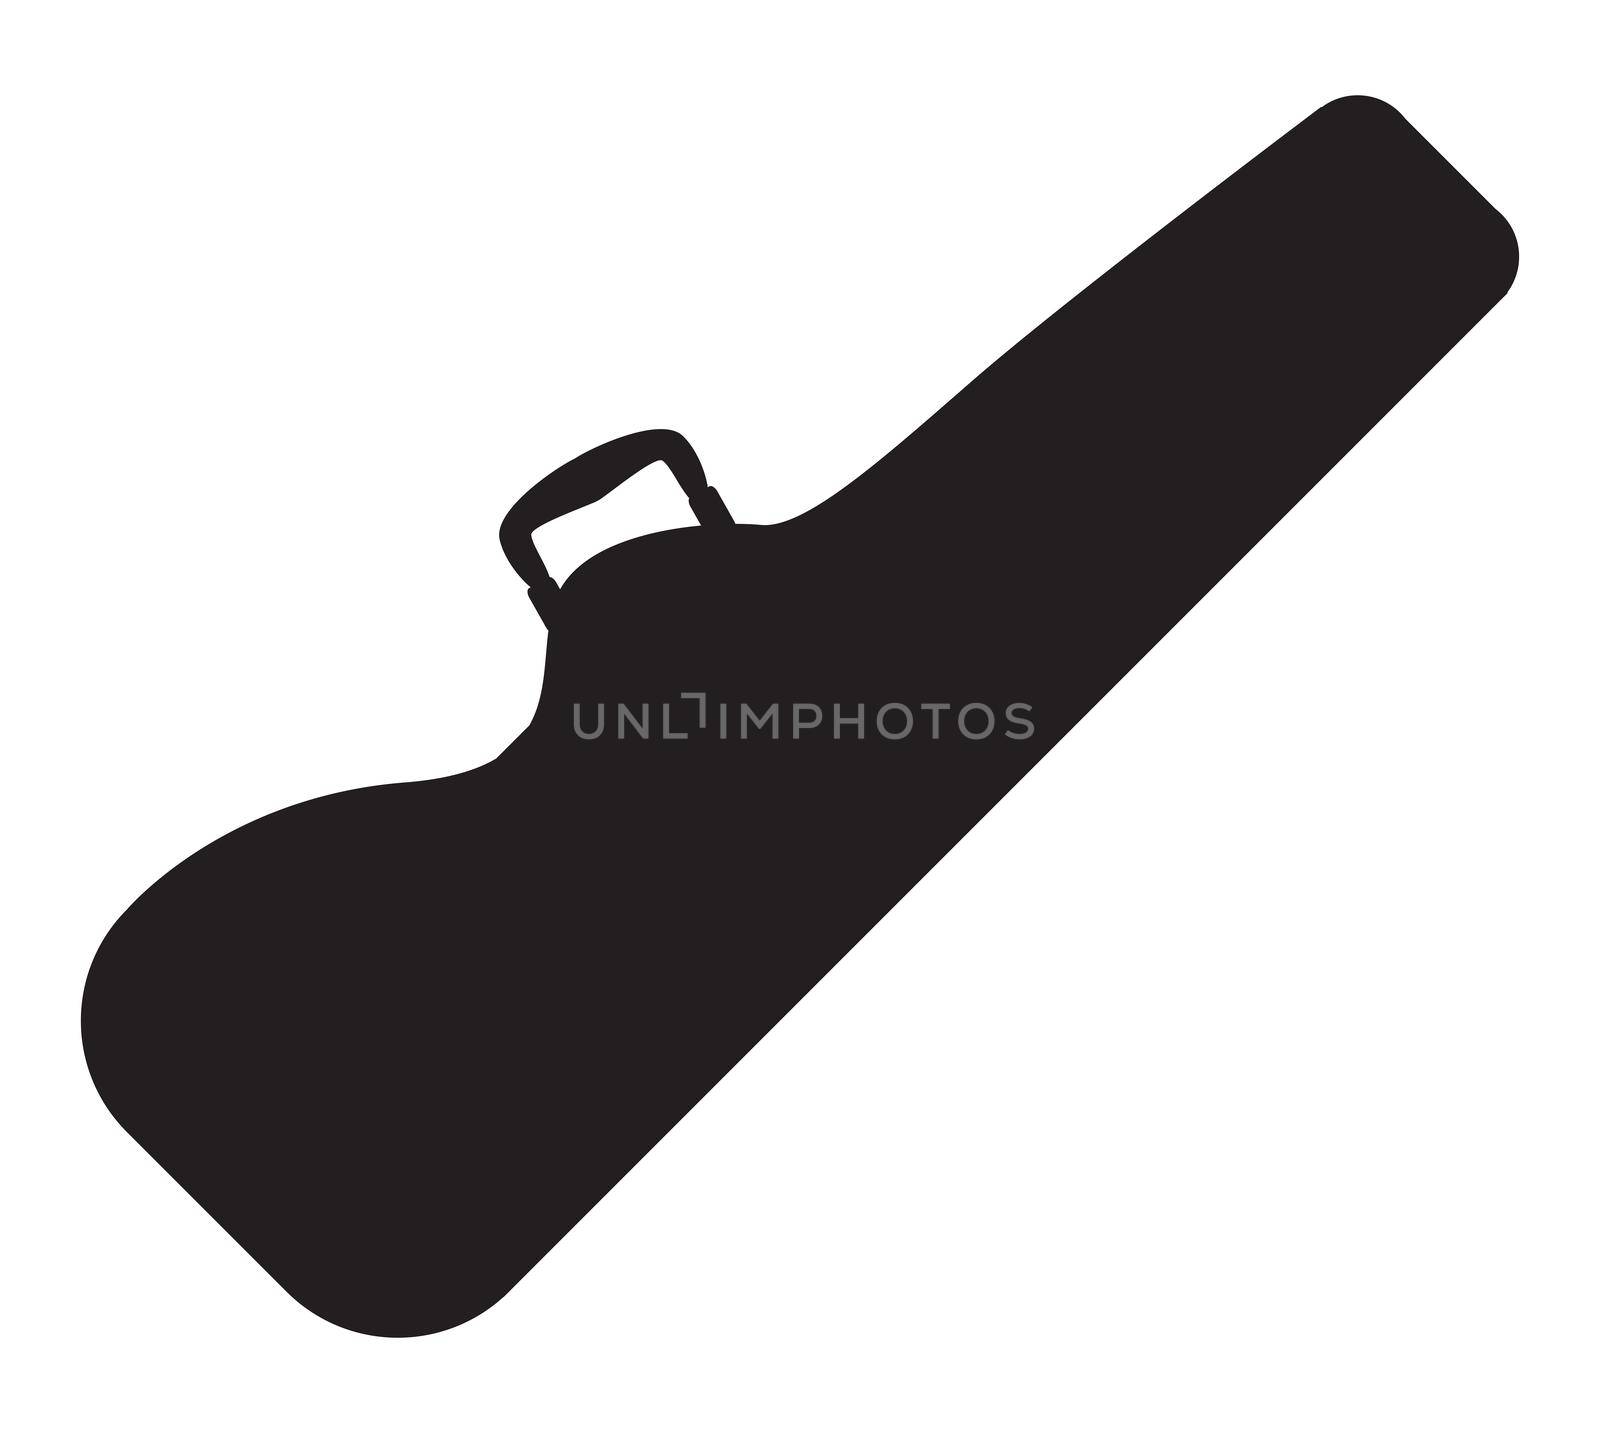 A shaped electric guitar case silhouette on a white background